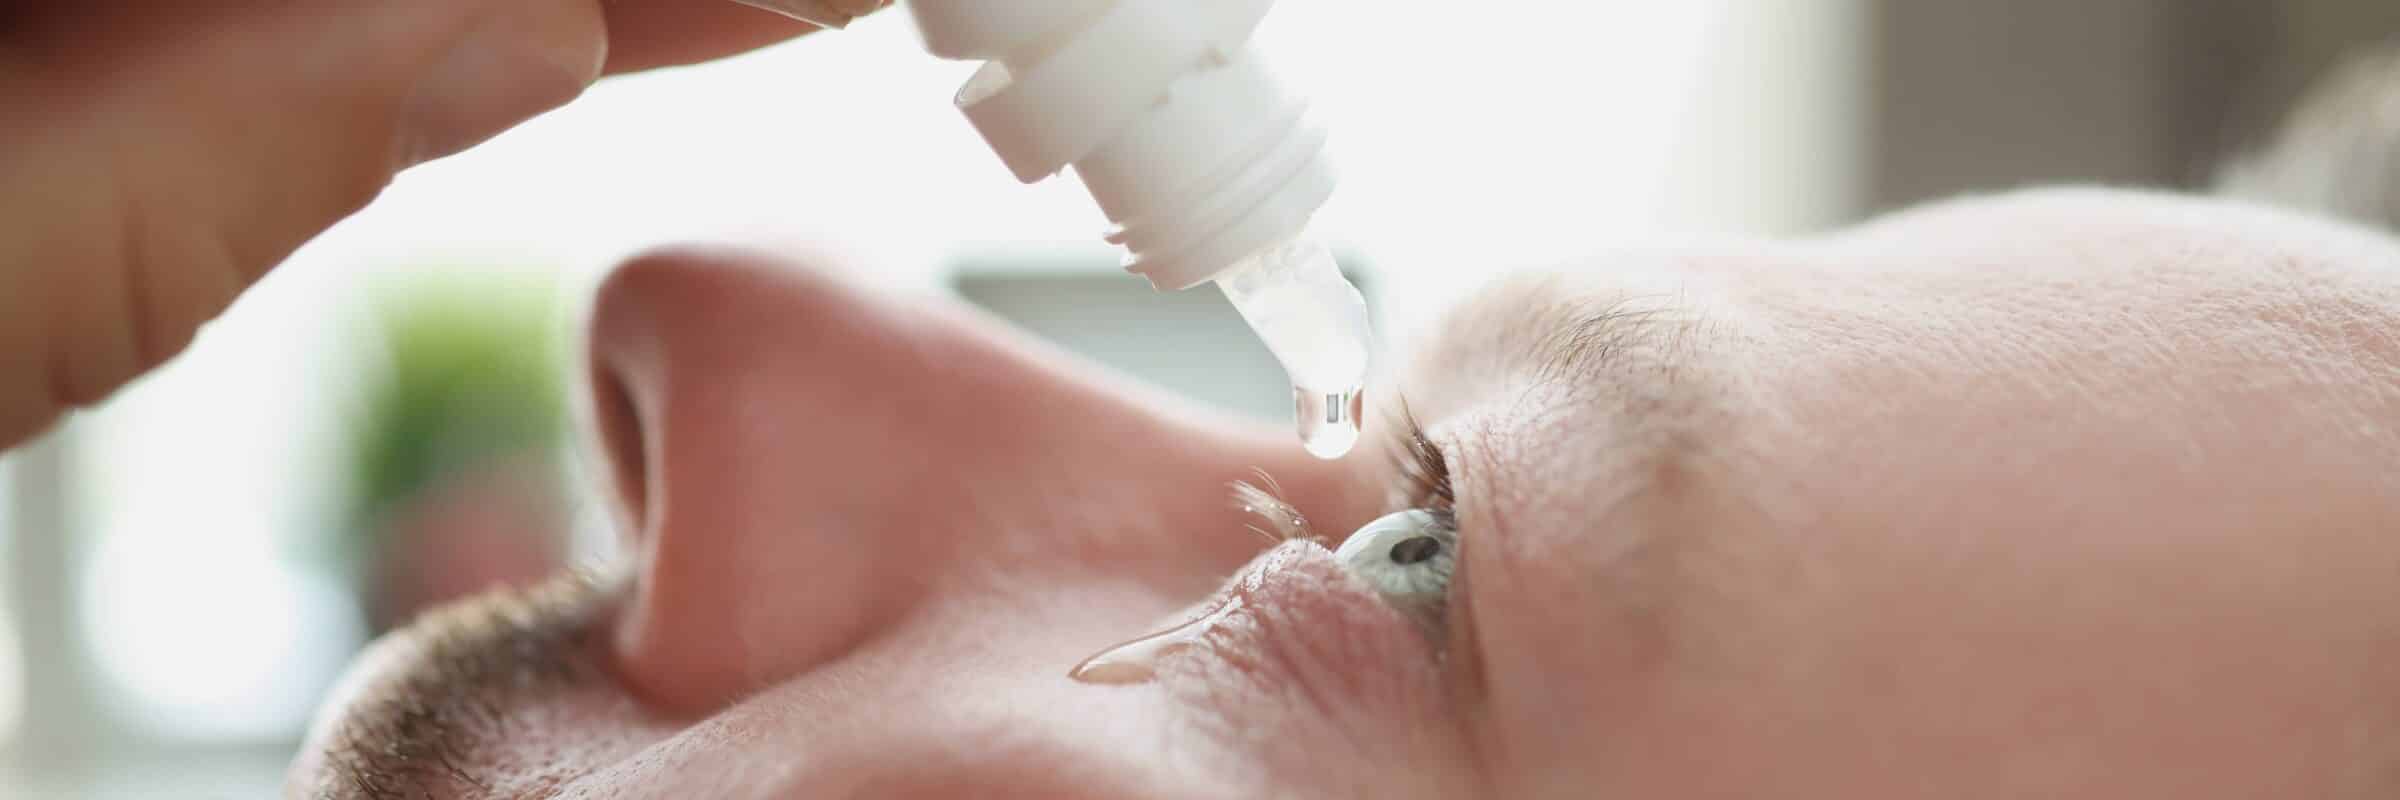 How Long Does It Take For Dry Eye Symptoms To Go Away?